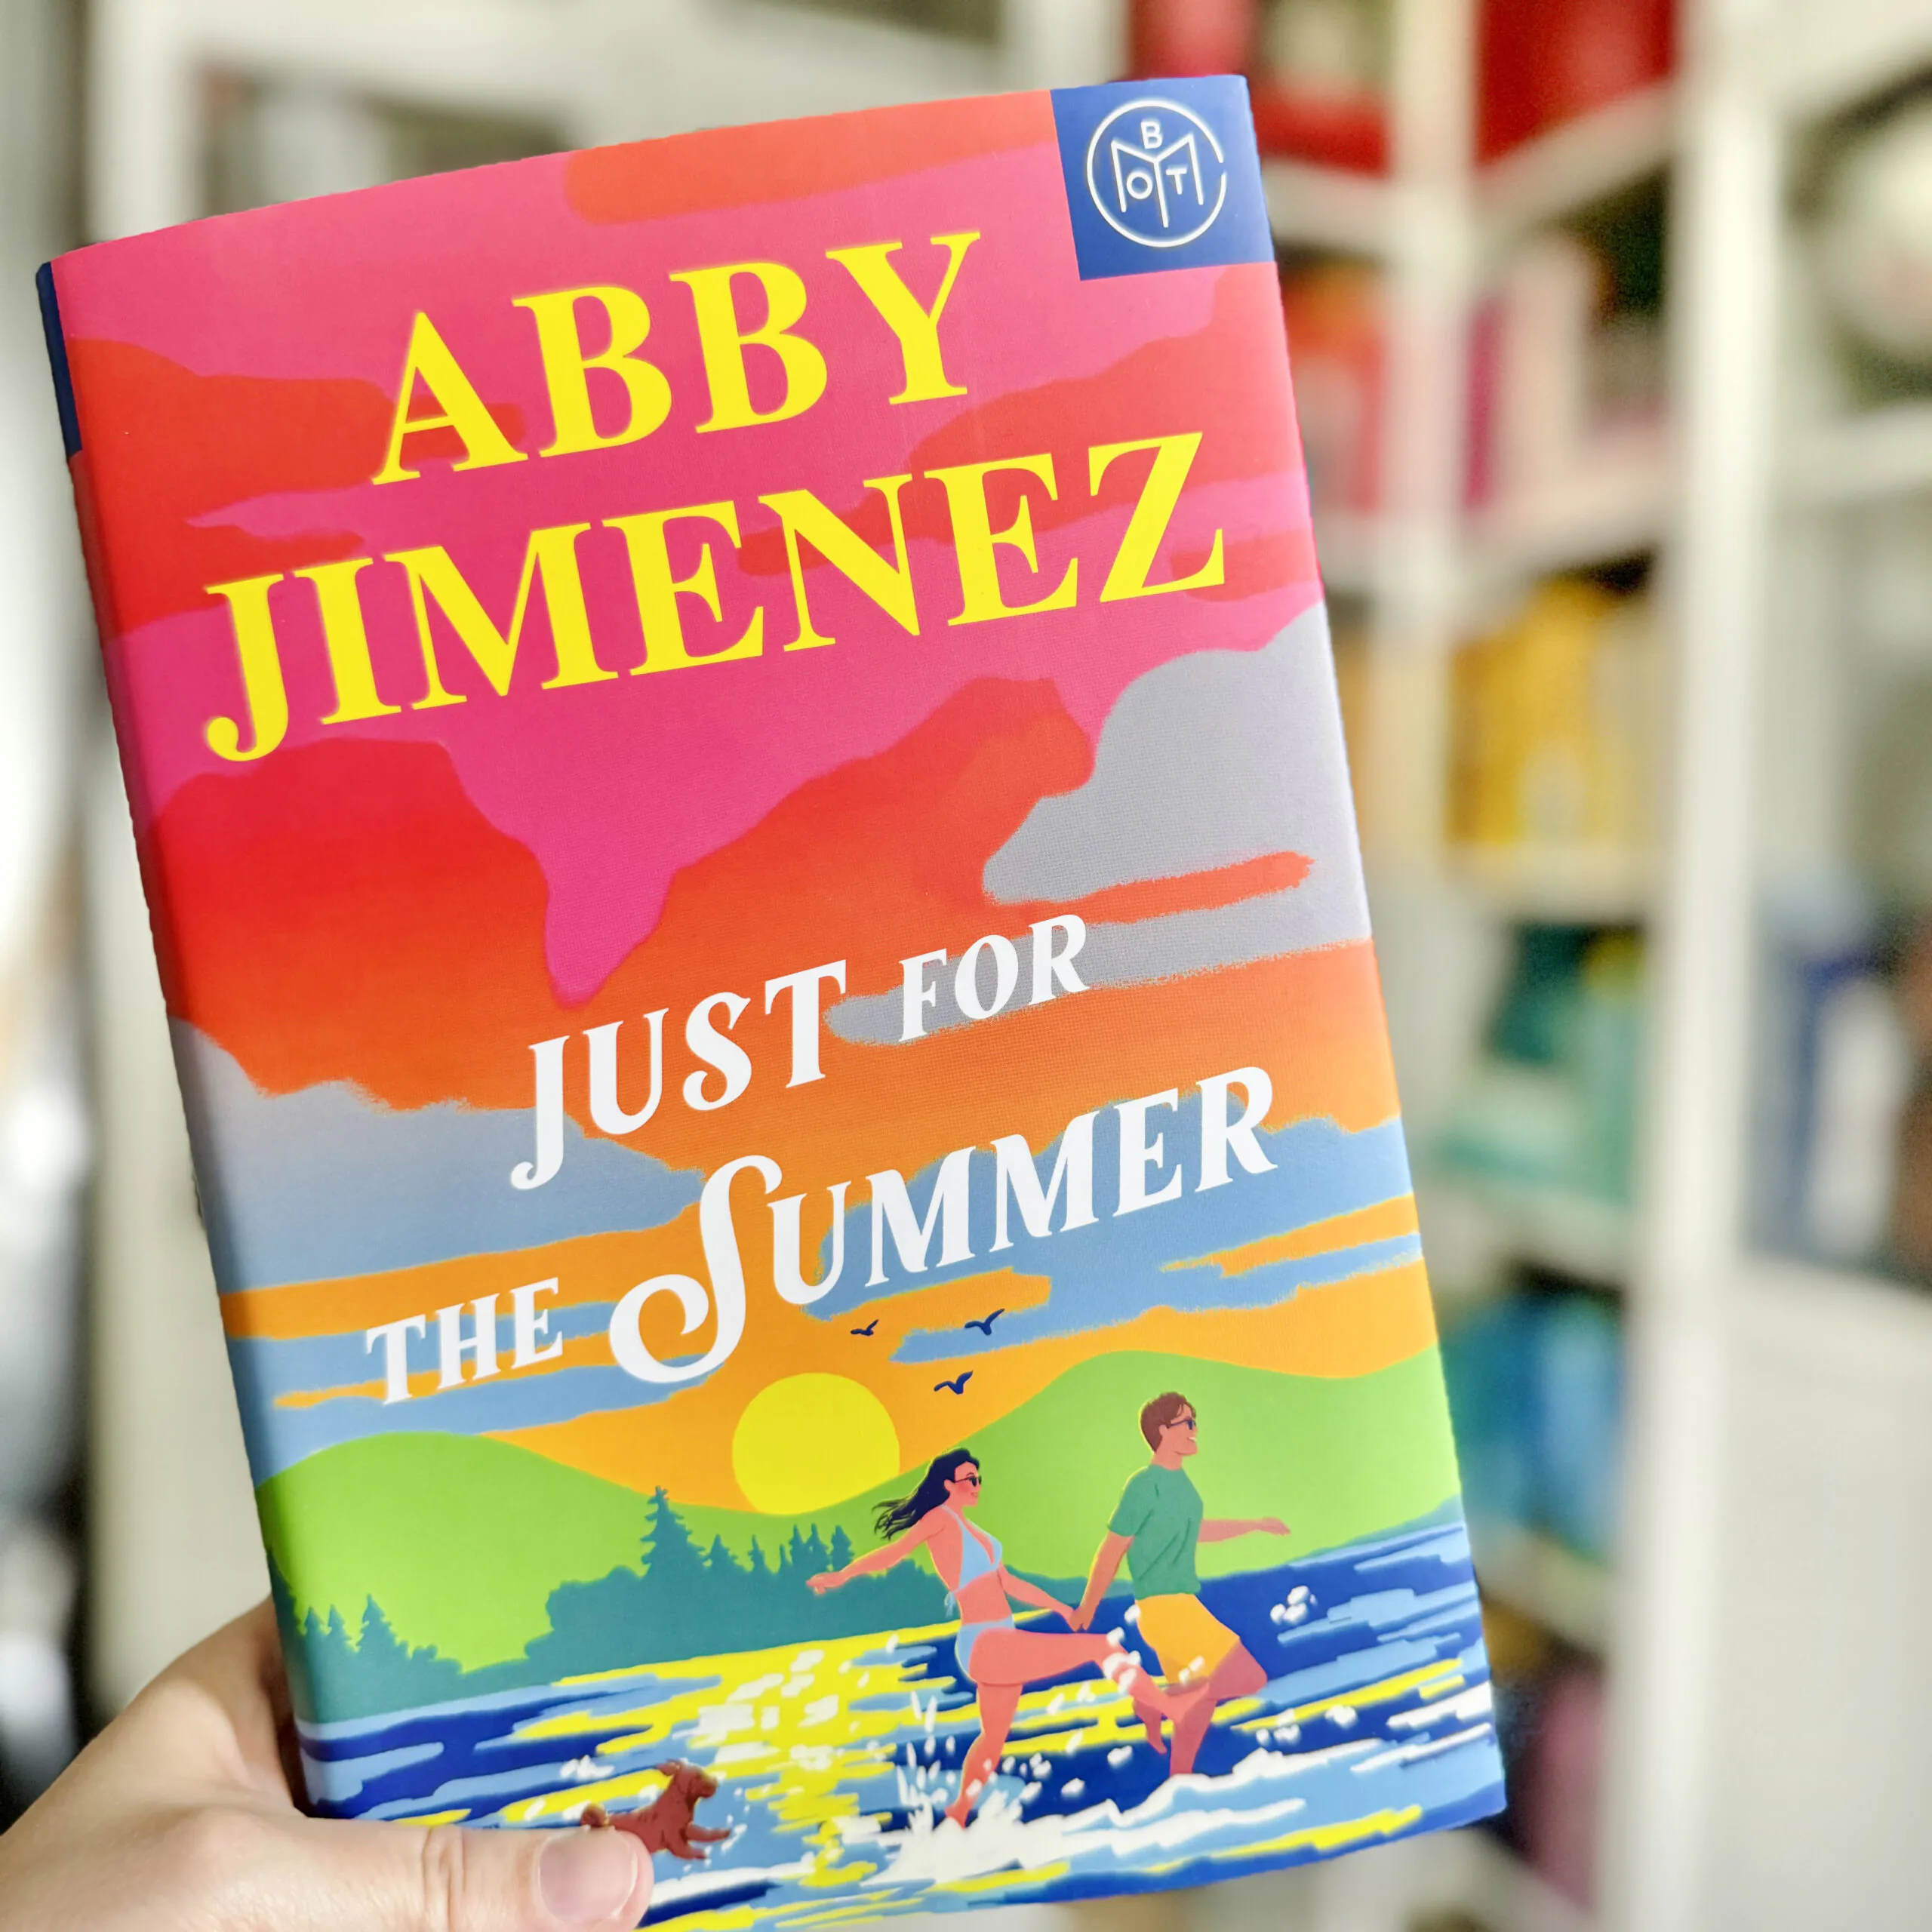 A hand holding a copy of the book Just for the Summer by Abby Jimenez in front of a white bookshelf with books organized by color